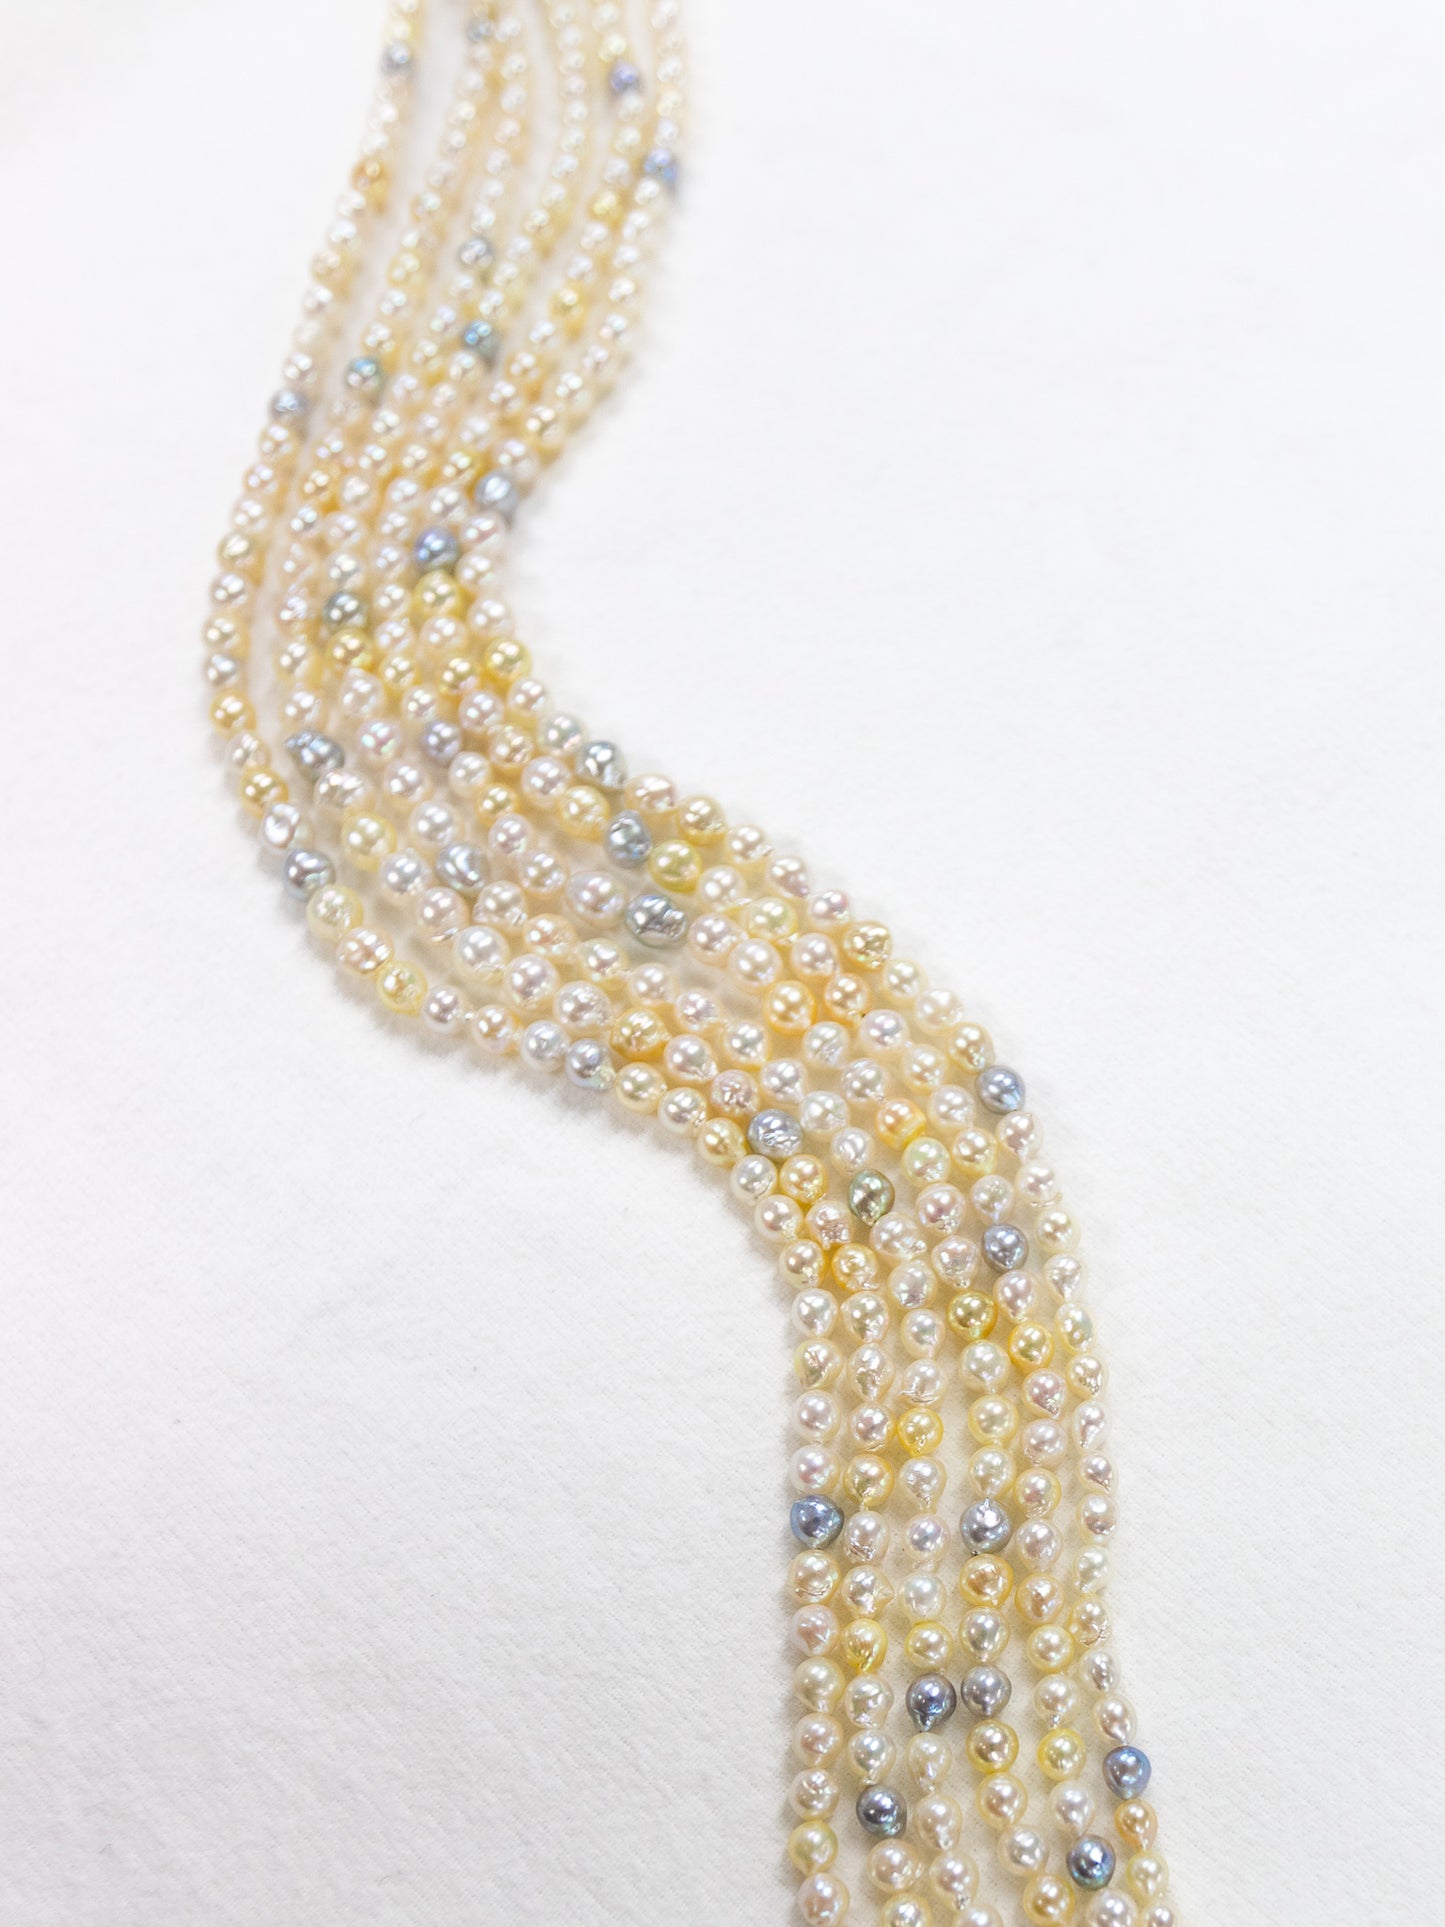 8.5-9mm Akoya Multicolored Round Necklace Strand